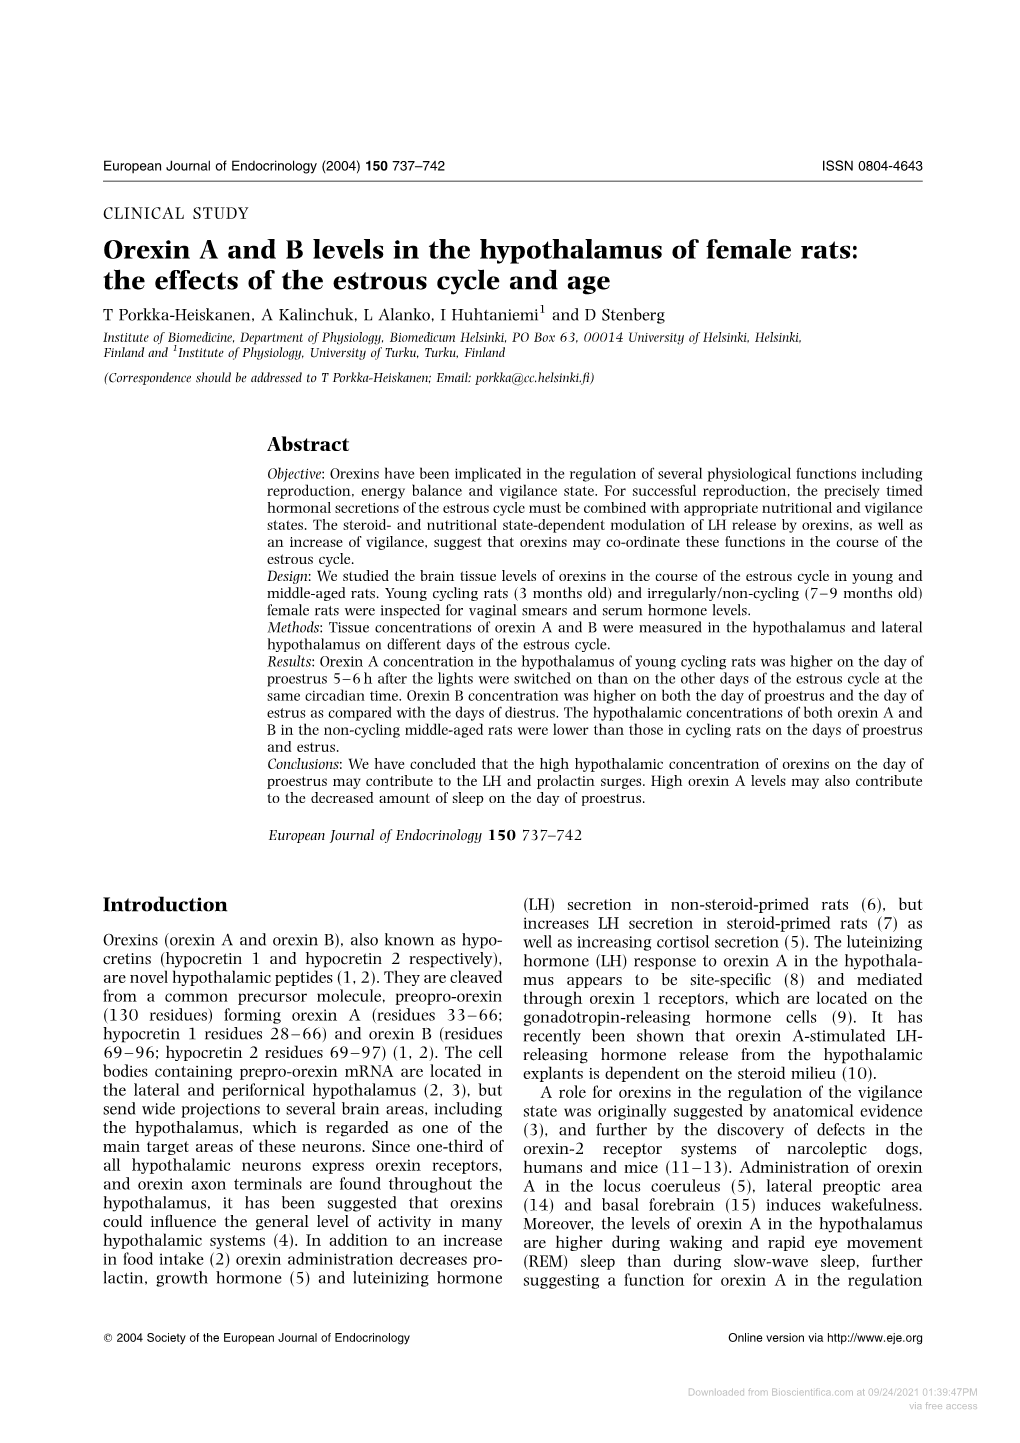 Orexin a and B Levels in the Hypothalamus of Female Rats: The